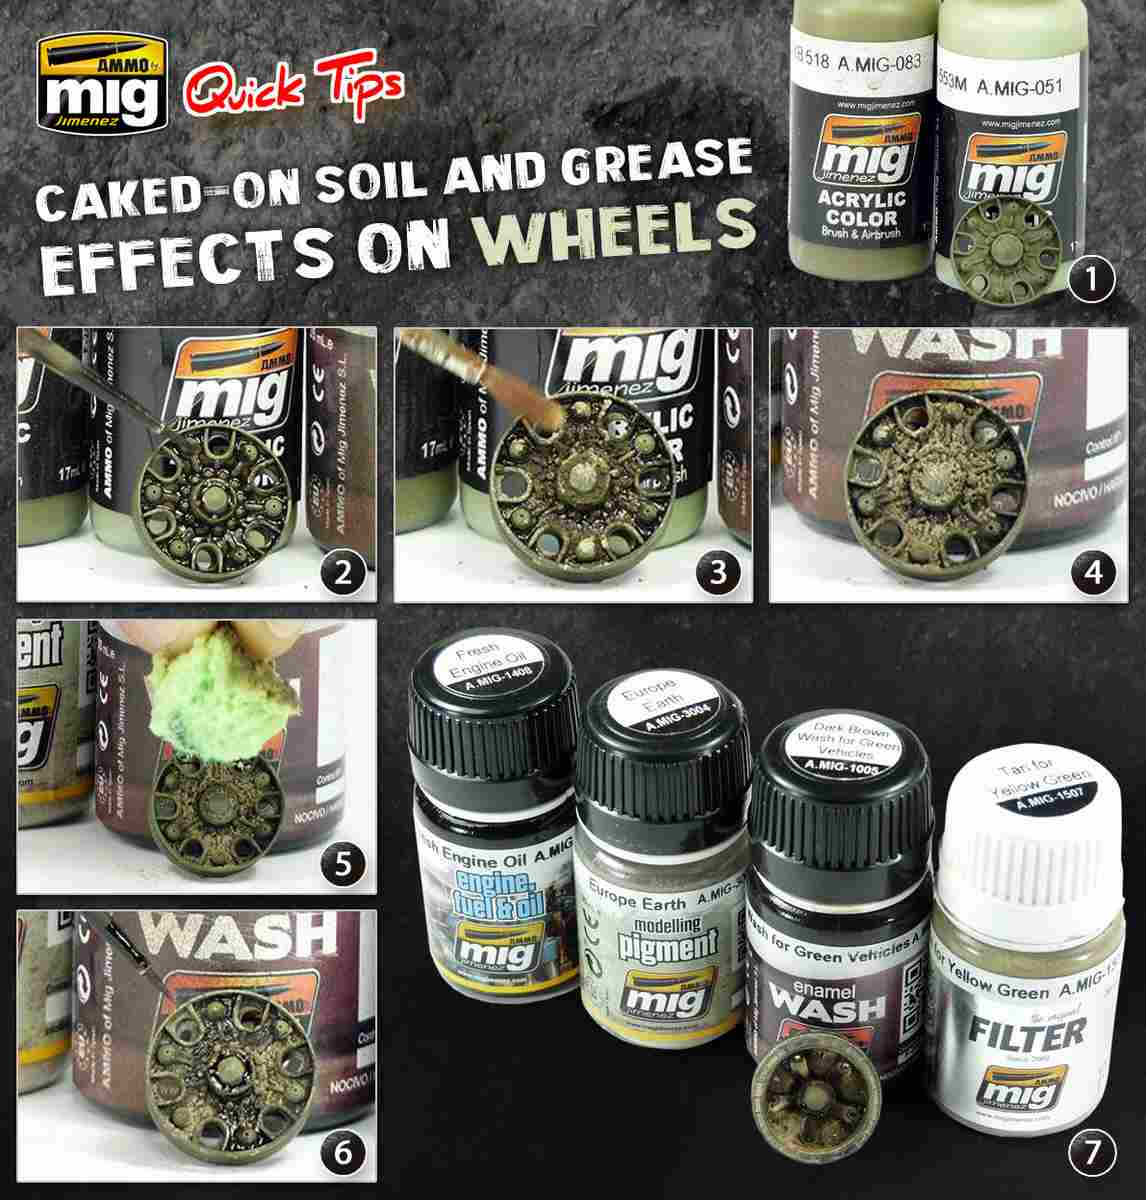 Ammo-by-Mig-Caked-Soil-effects Caked Soil and grease Effects on wheels Ammo by Mig Quicktip